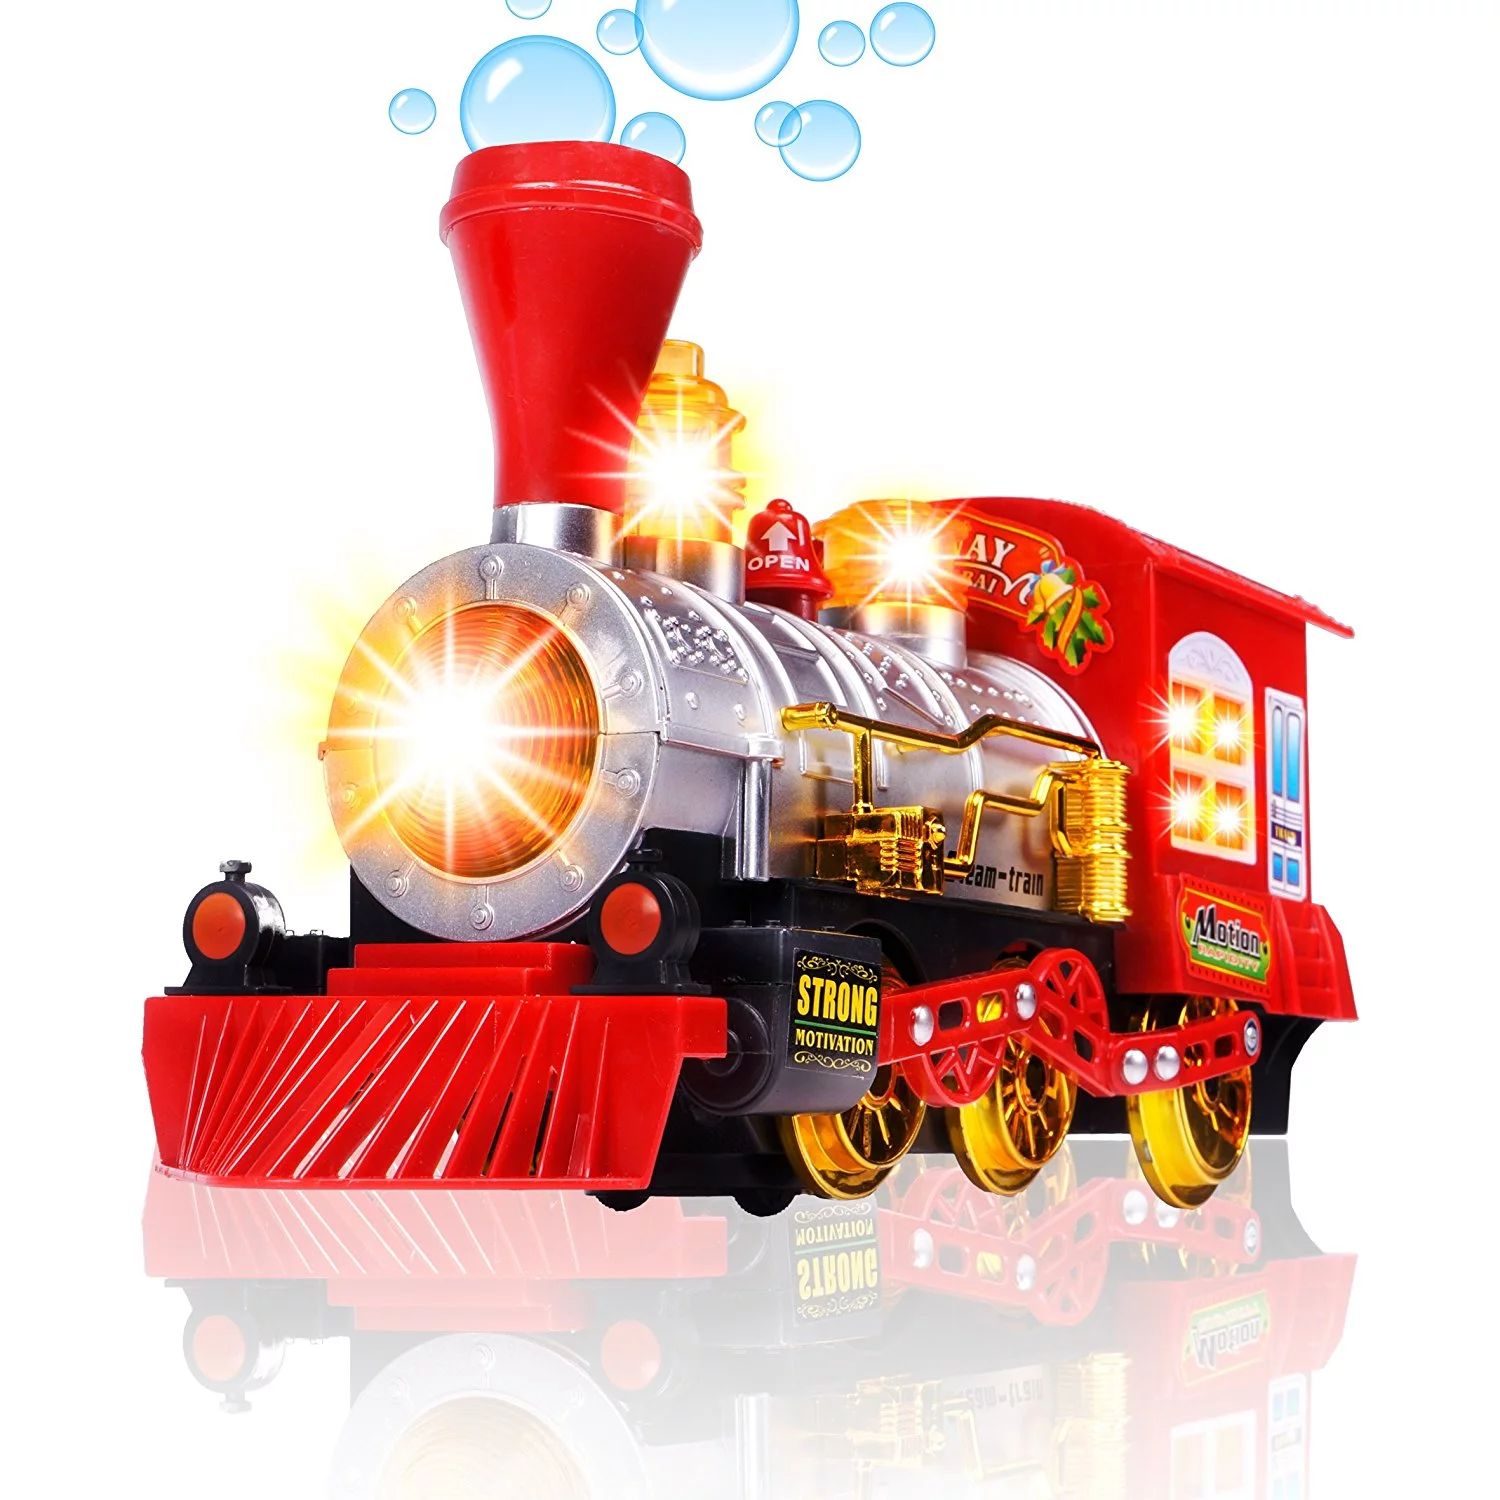 CifToys Bubble Blowing Toy Train - Battery Powered Steam Bubbles Locomotive Train | Walmart (US)